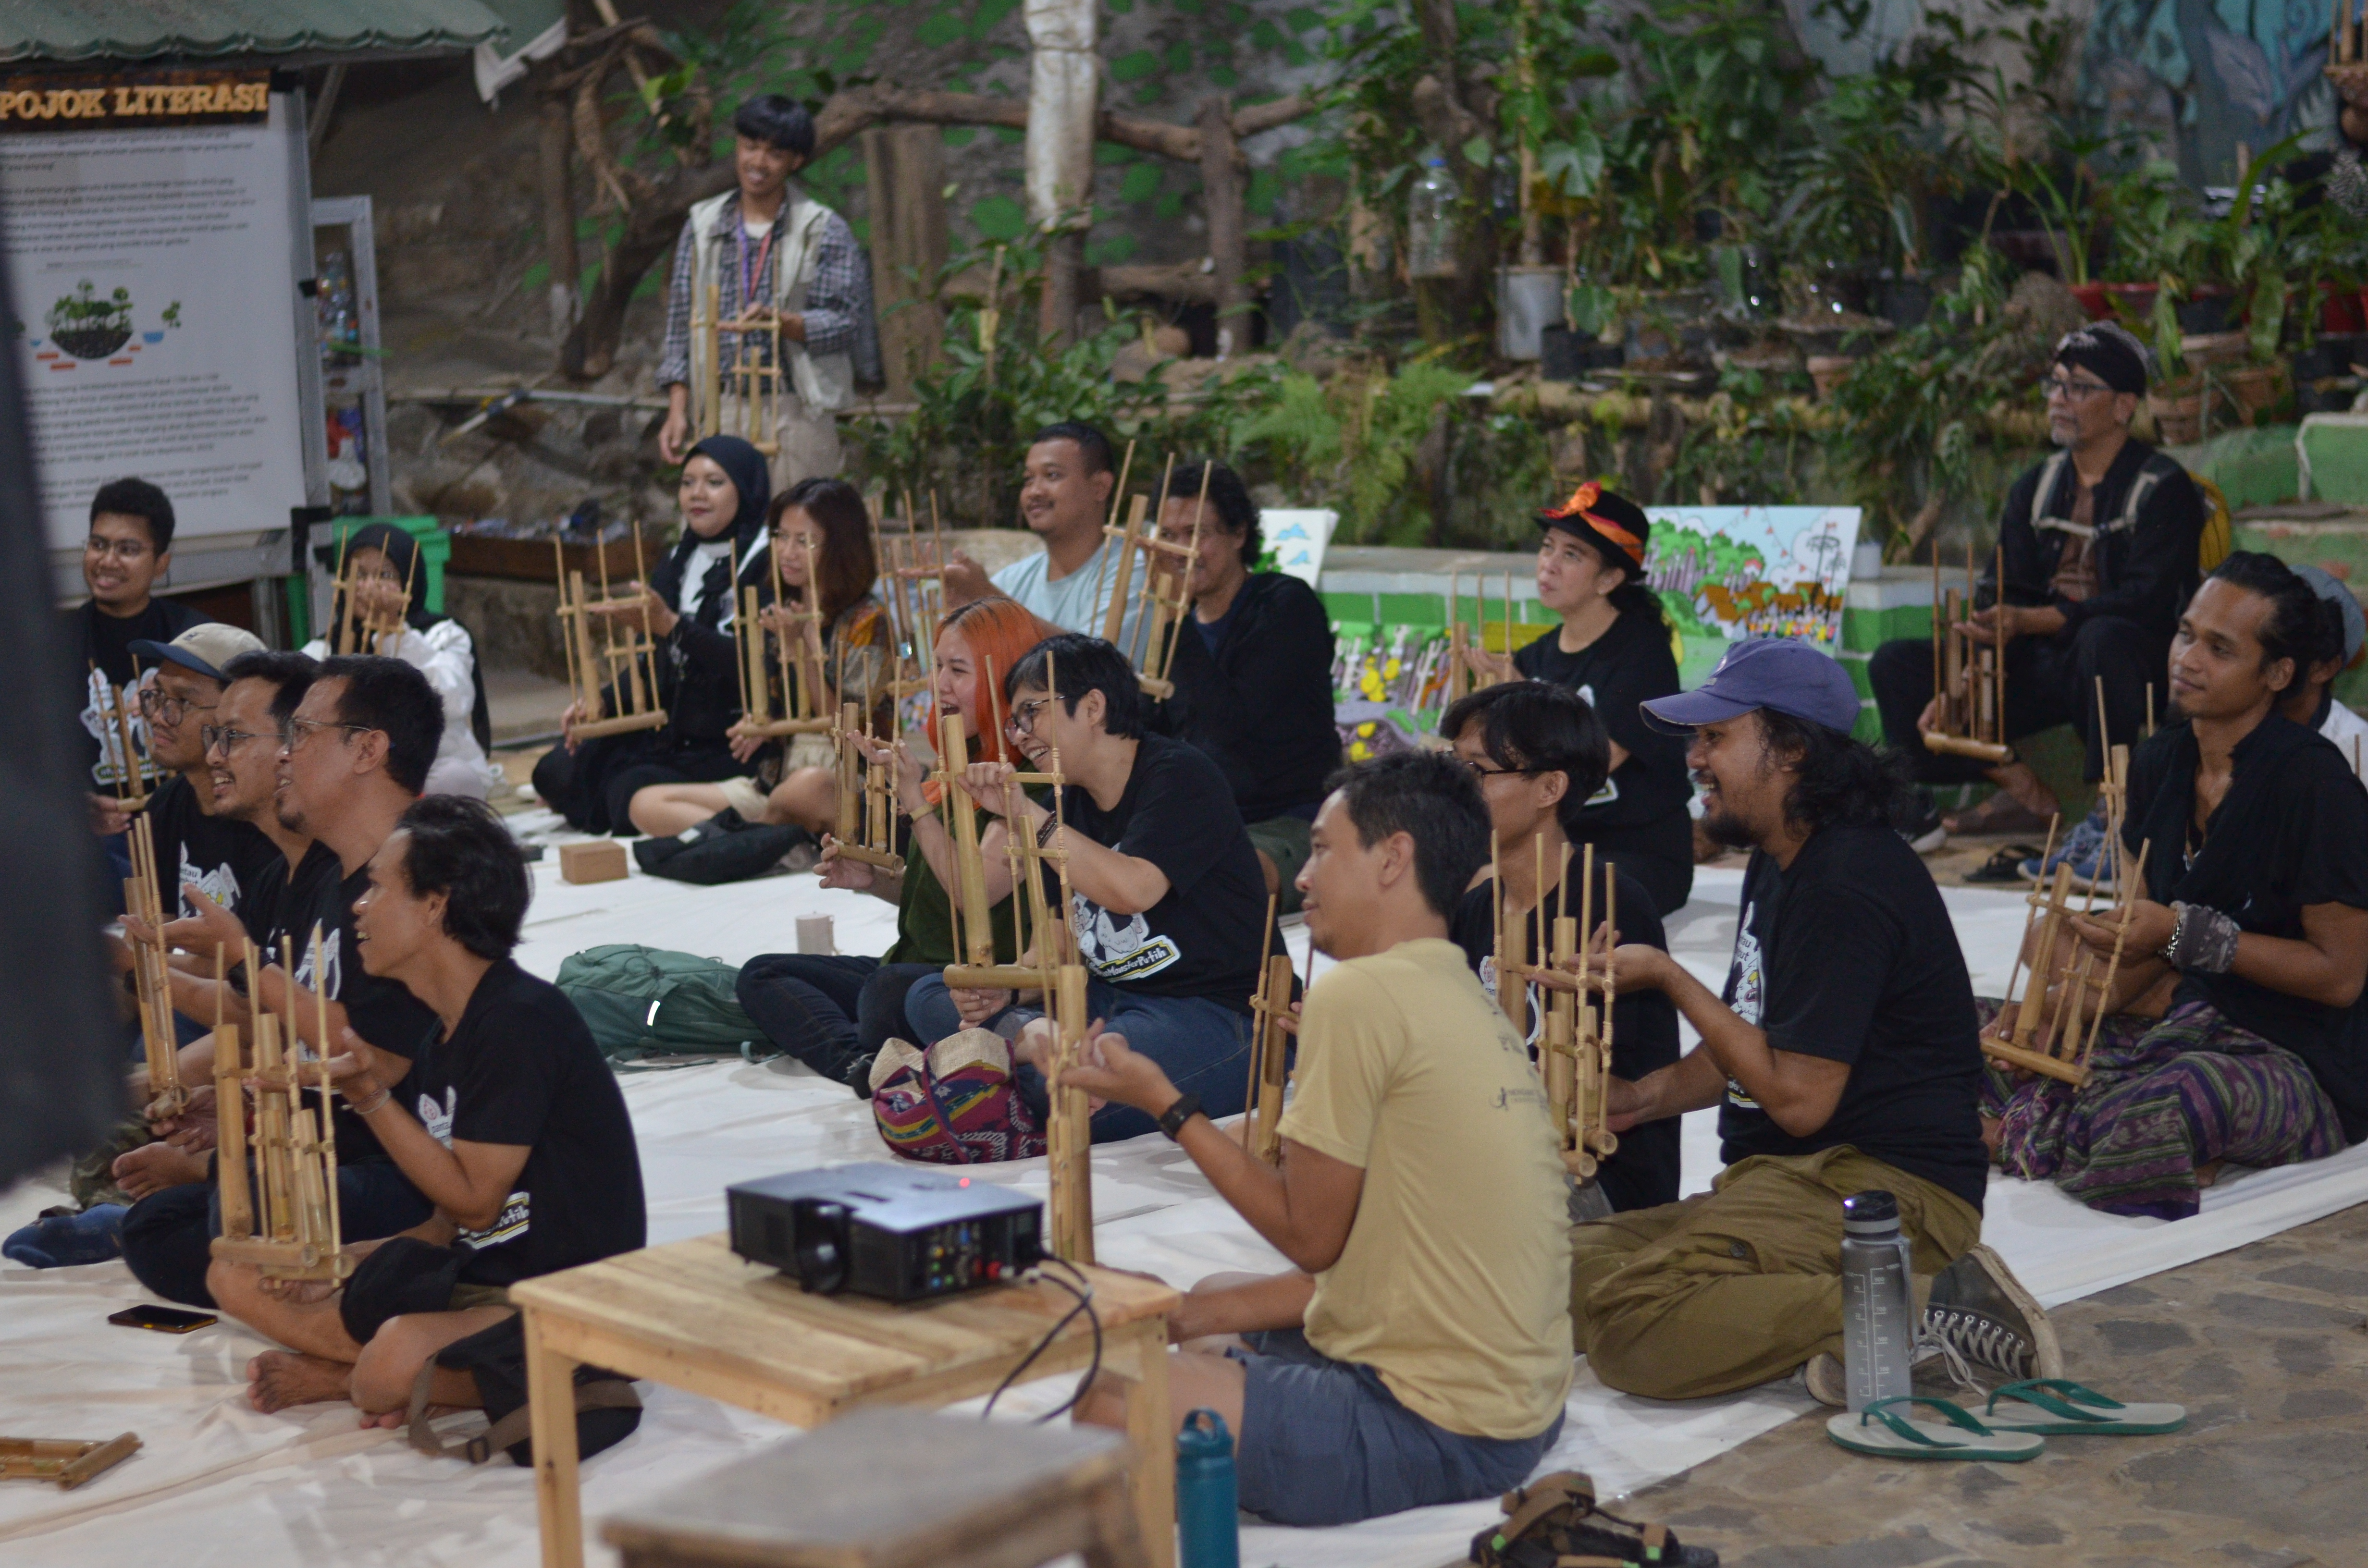 A training session on playing the angklung by the Ciliwung Community in Depok.